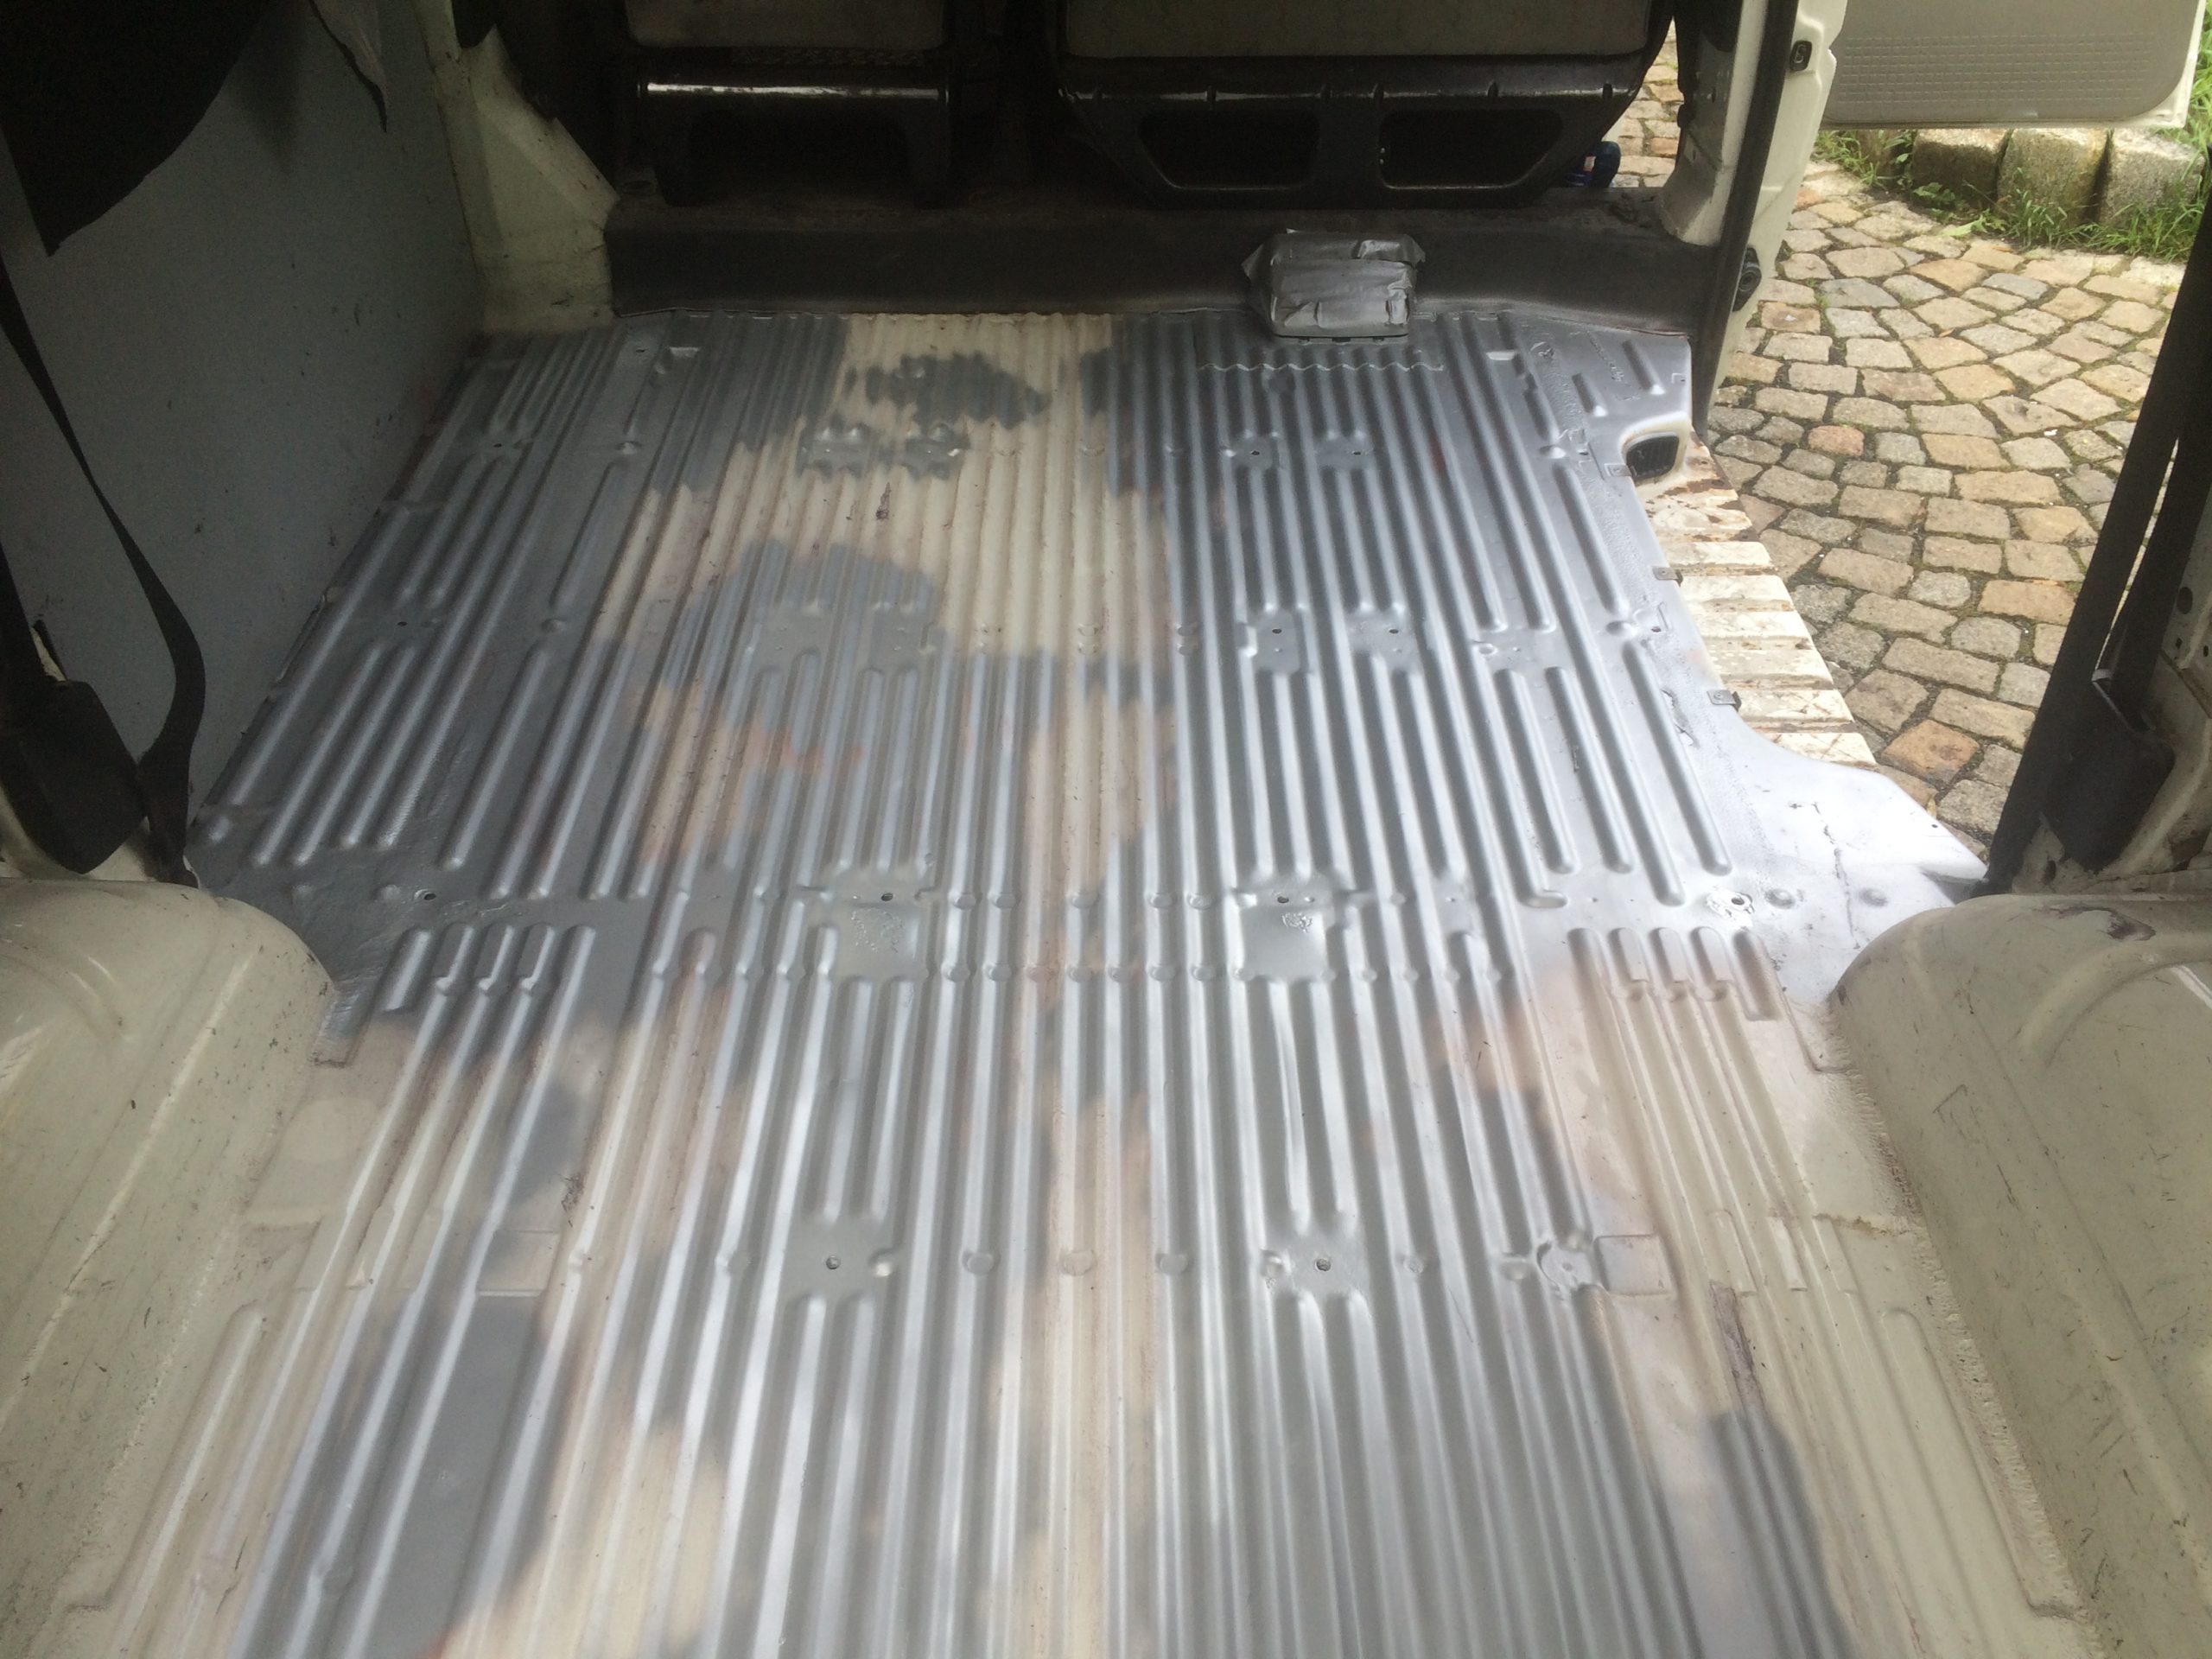 VW T4 Project – War against Rust – Battle VI - Interioir - from the back